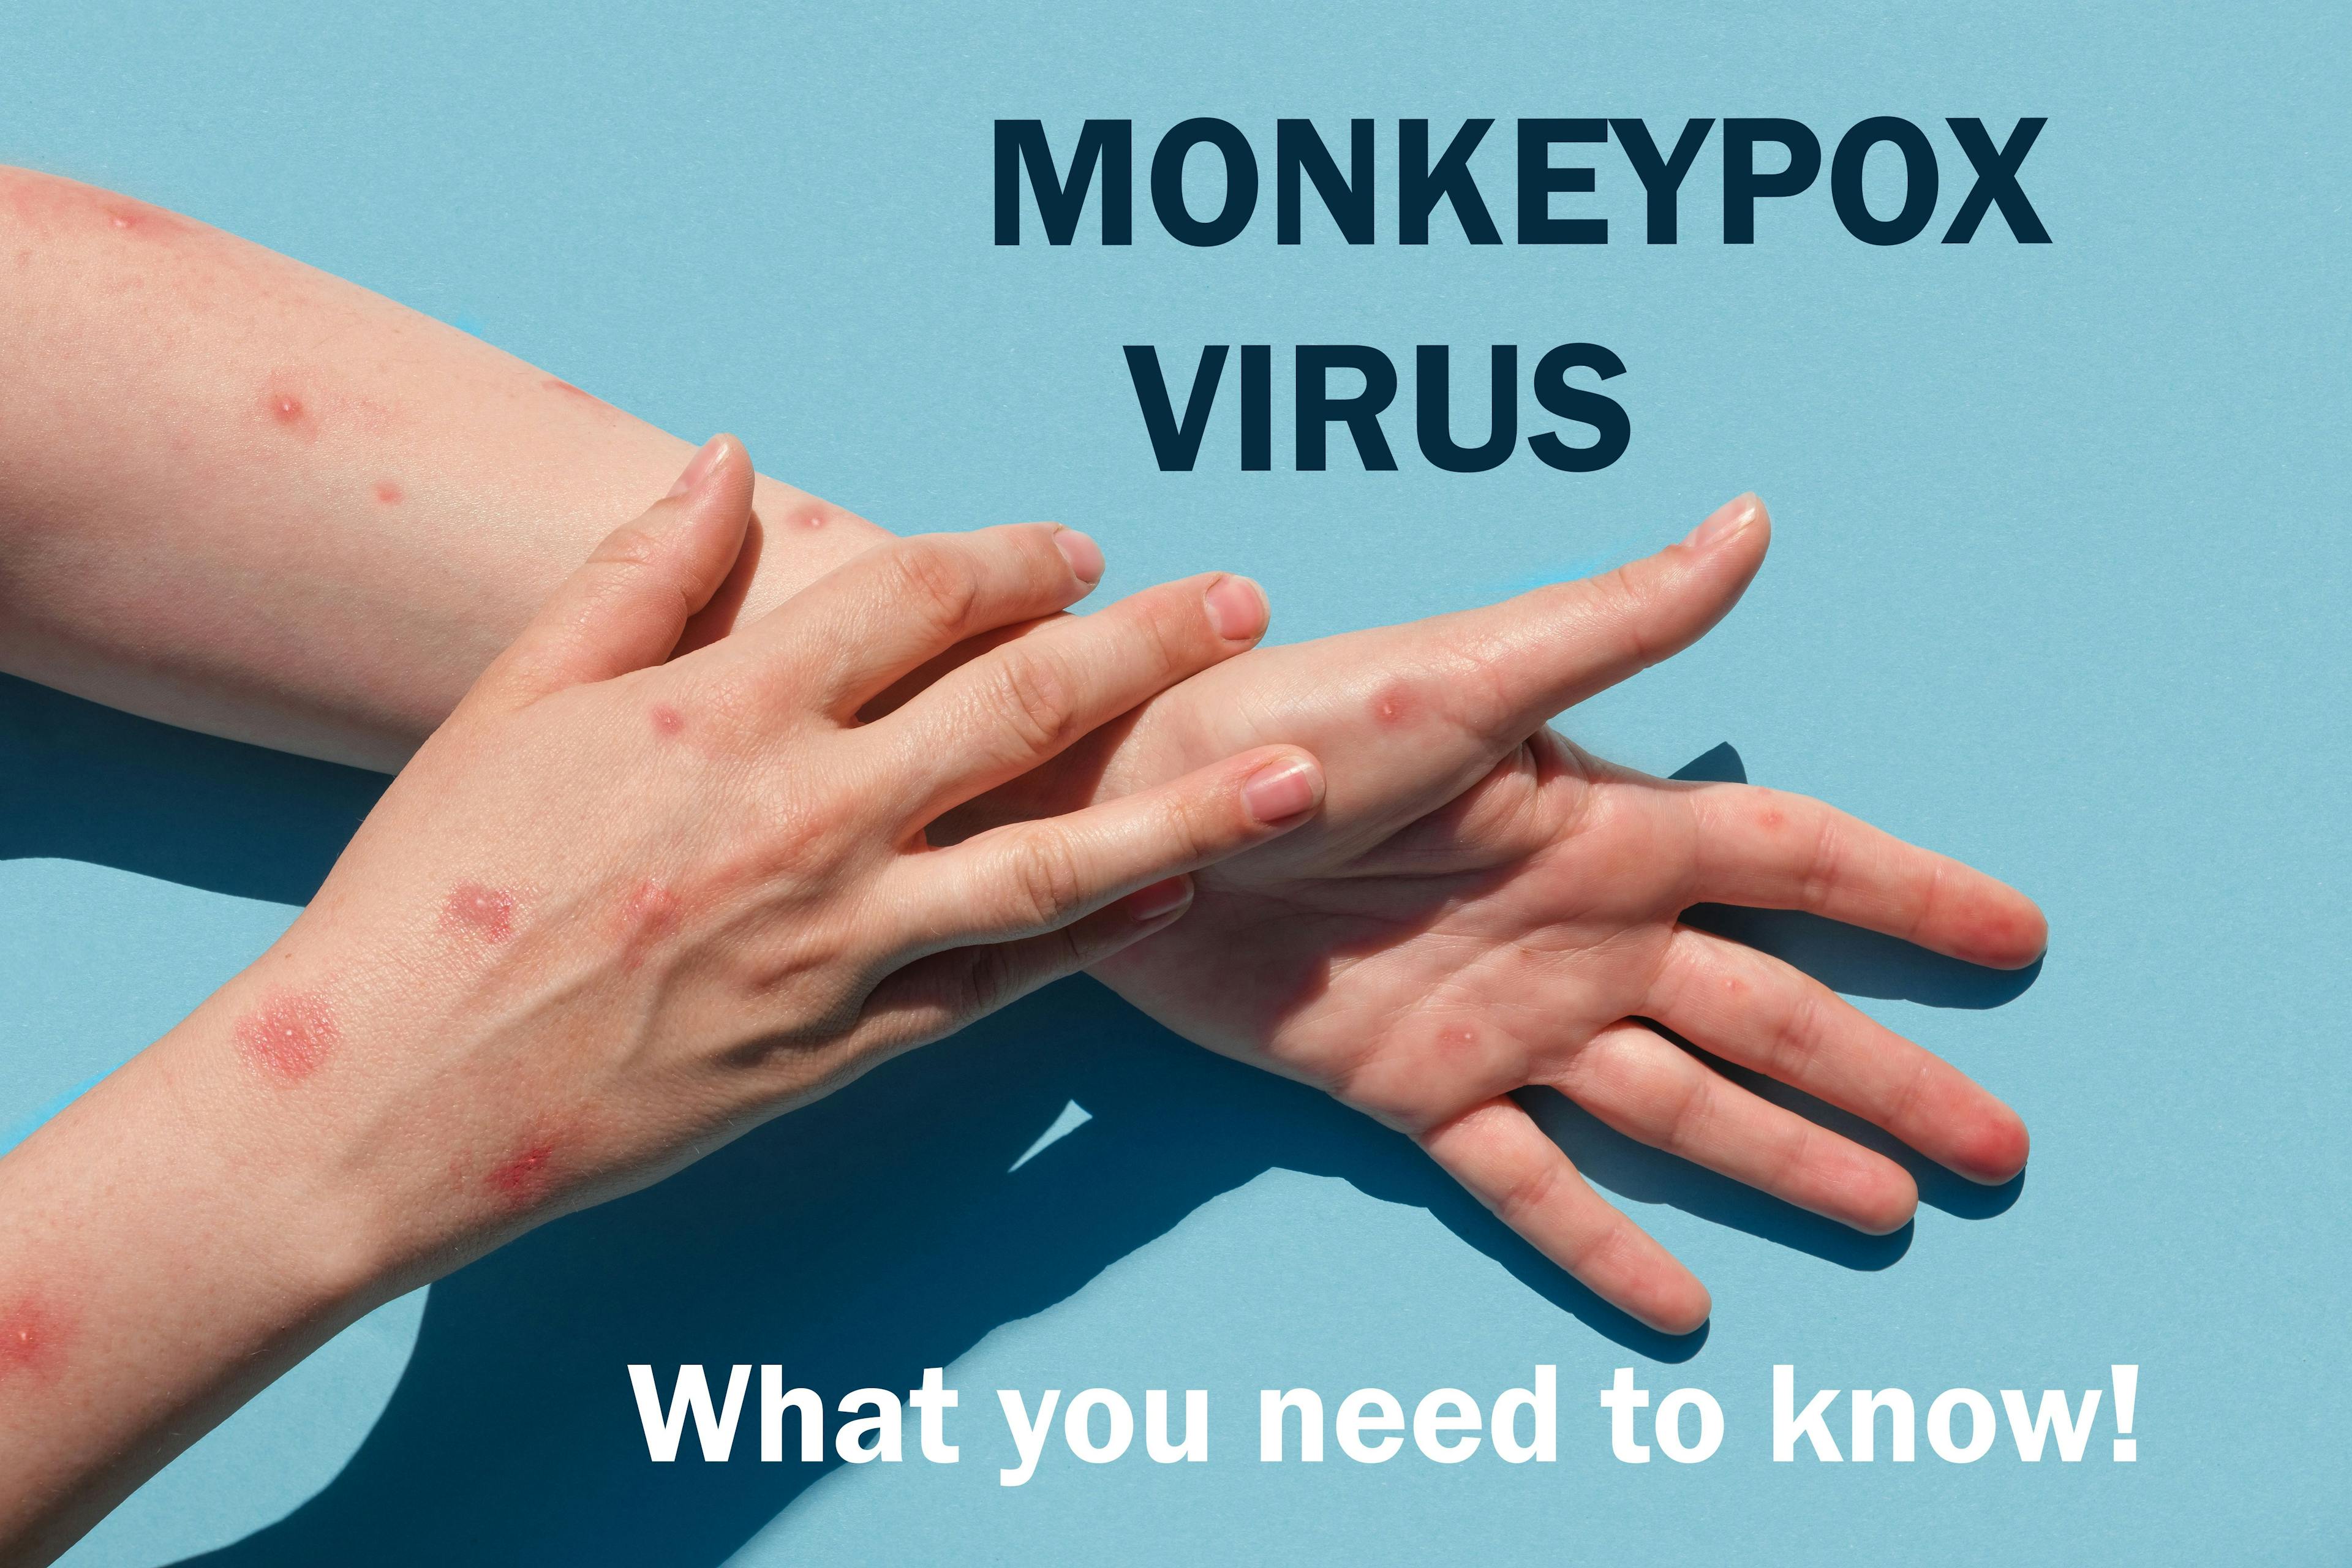 New precautions detail what clinicians treating suspected or confirmed monkeypox cases need to know.